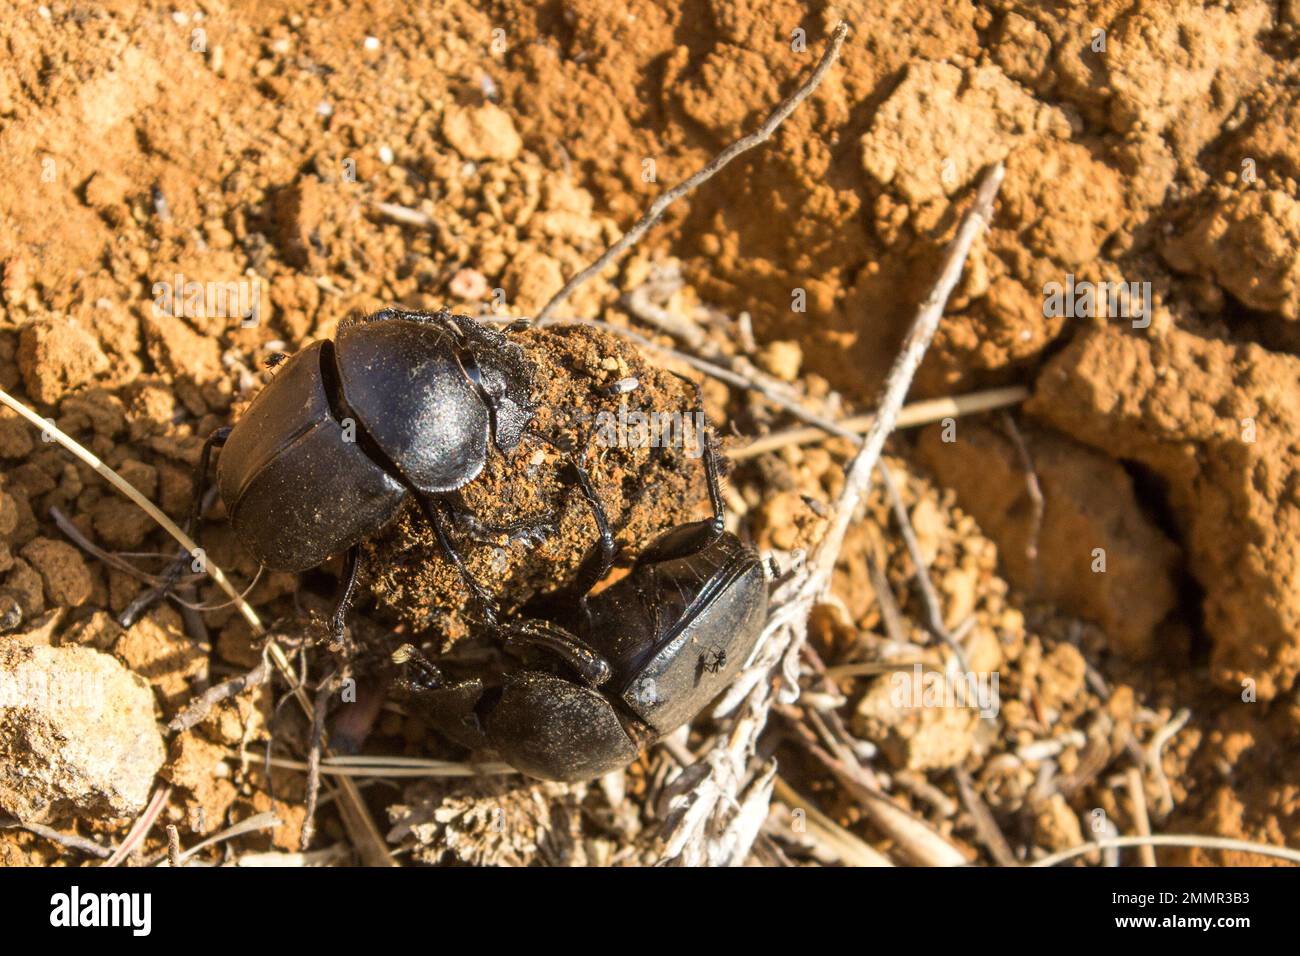 Two dung beetle’s fighting over a dung ball in the grasslands of the Drakensberg Mountains of South Africa Stock Photo